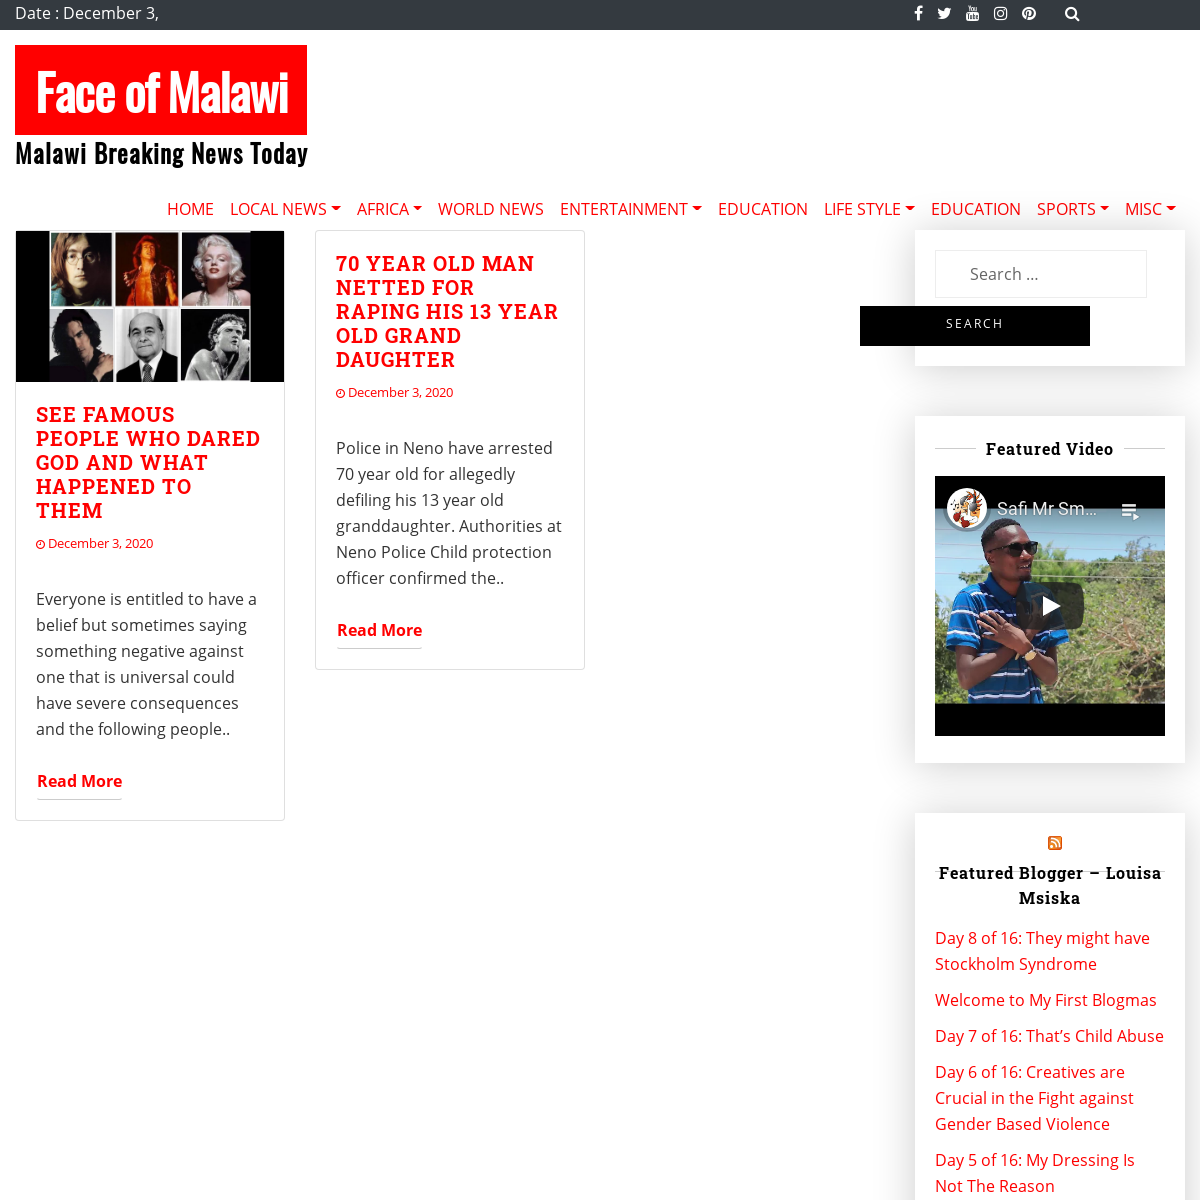 A complete backup of faceofmalawi.com